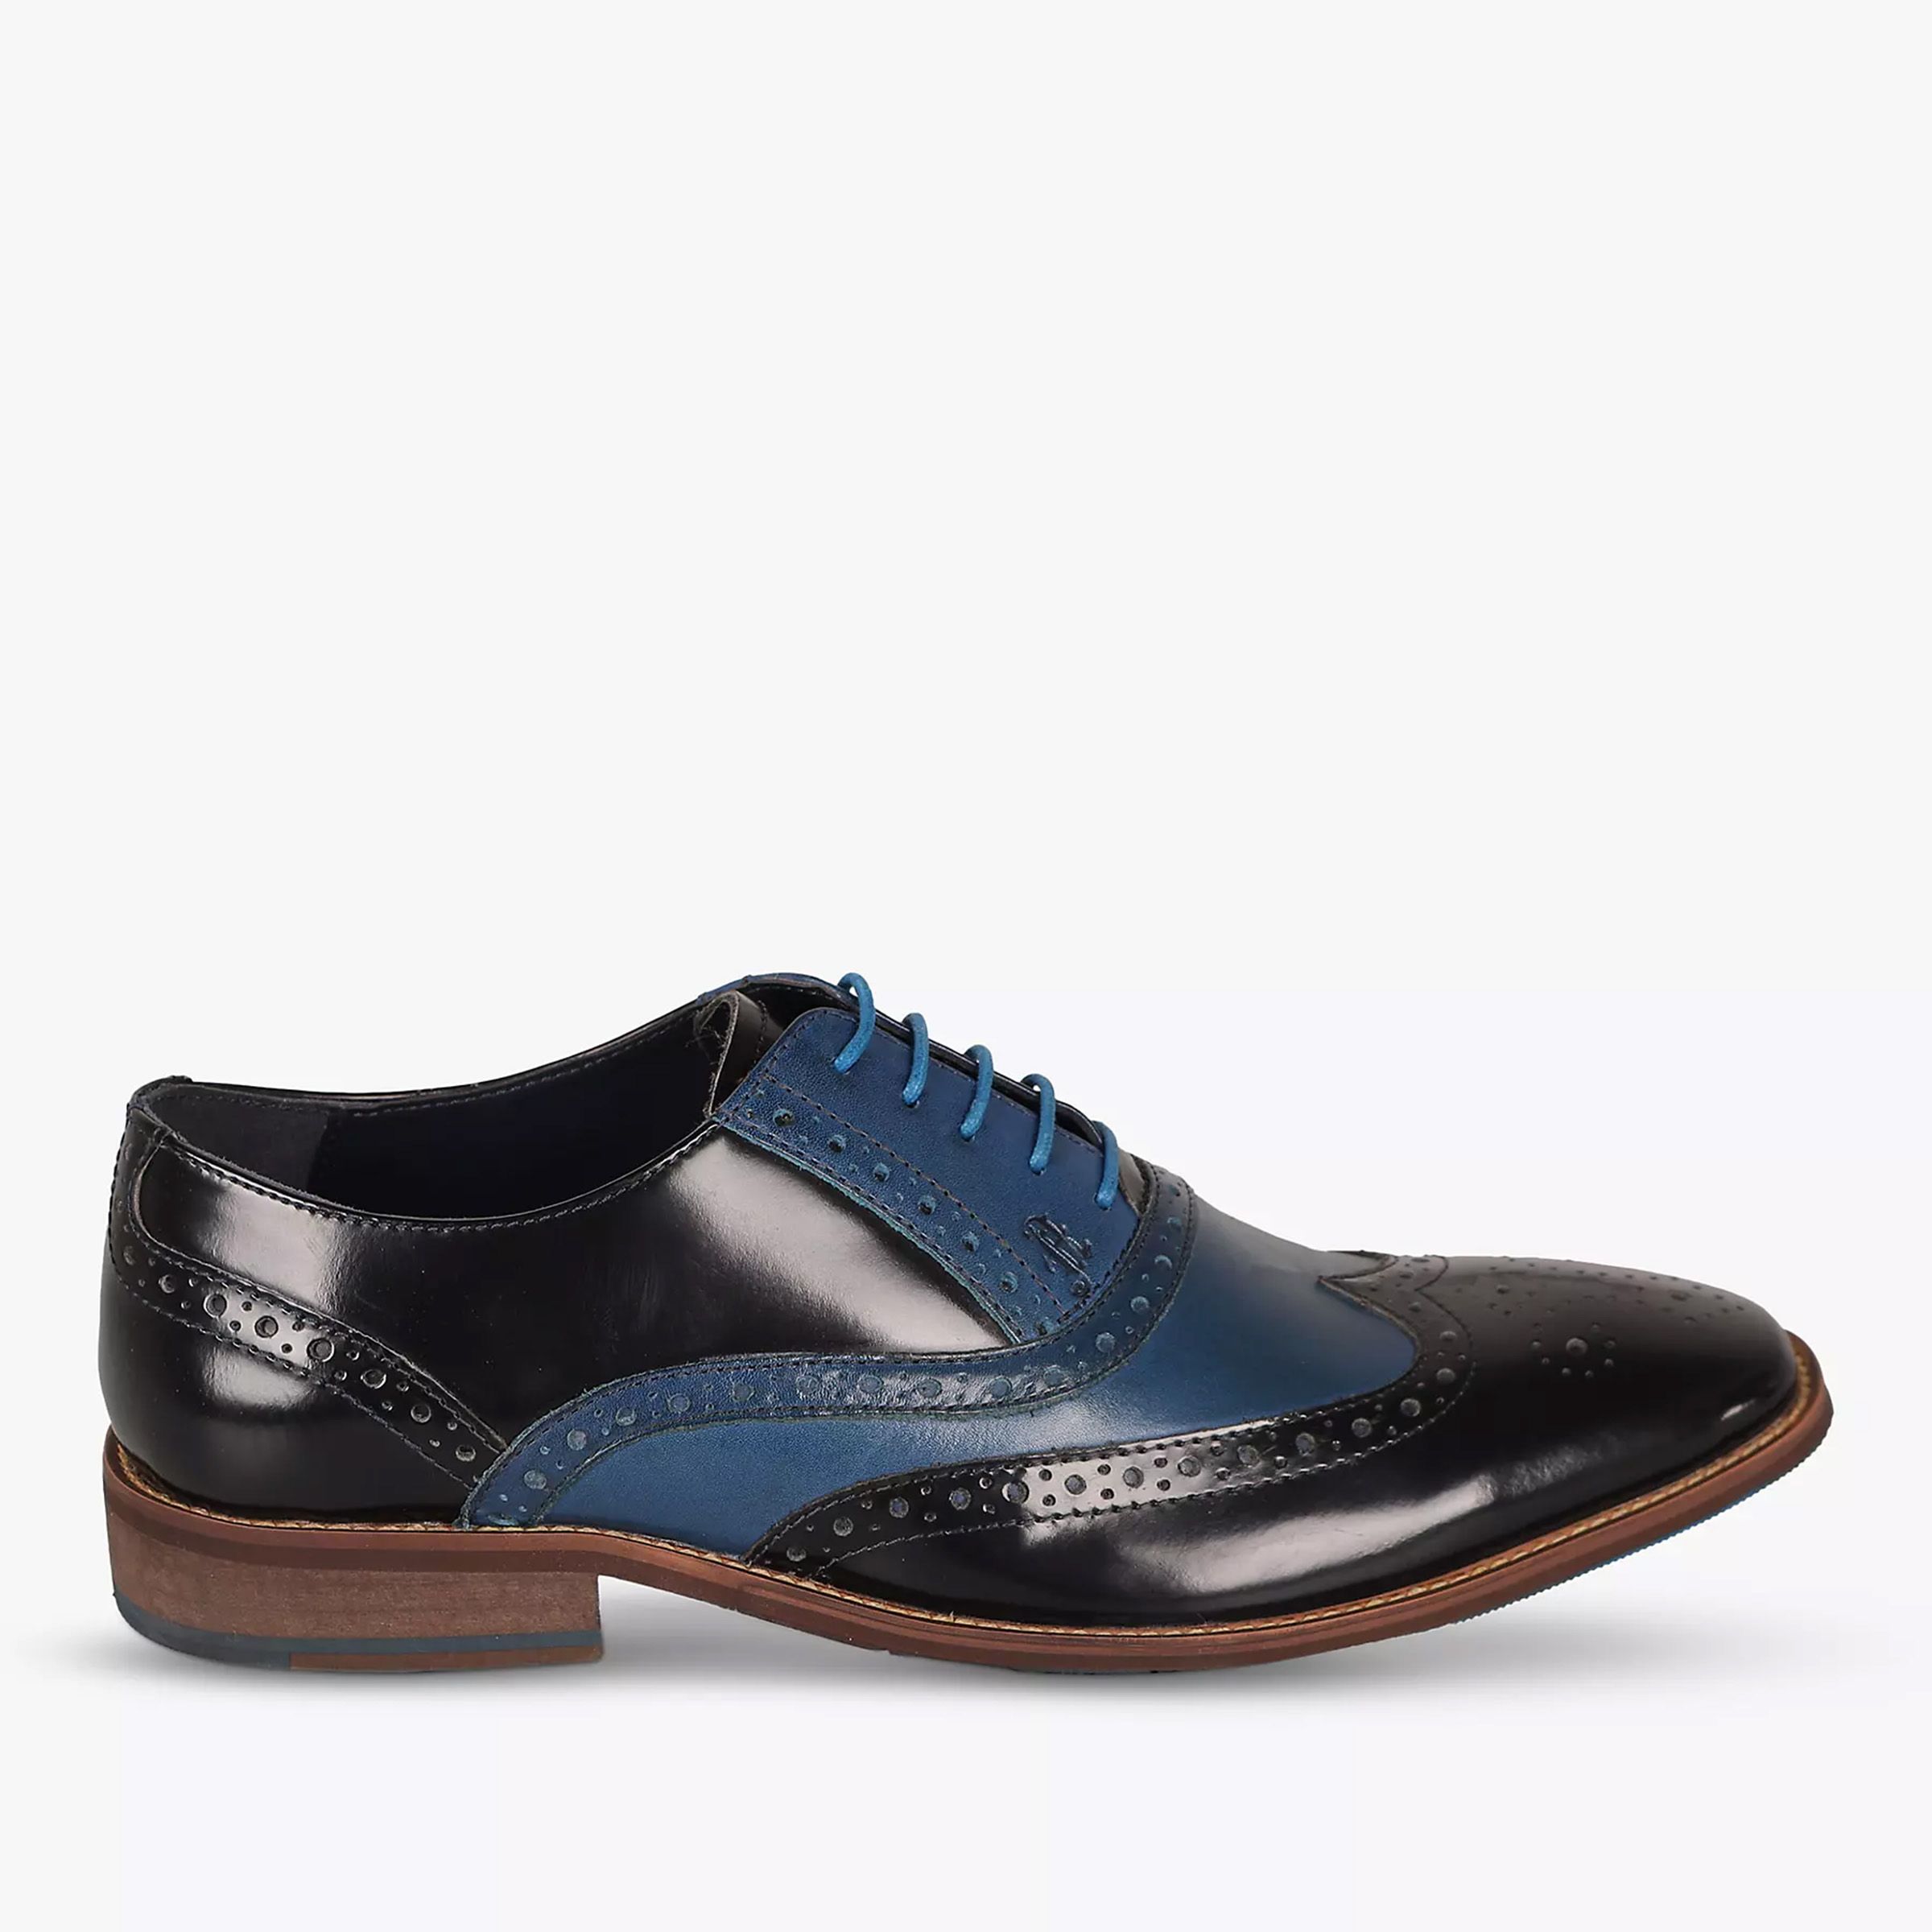 Men's Lace Up Shoe with Rubber Heel in Black, Hawes & Curtis